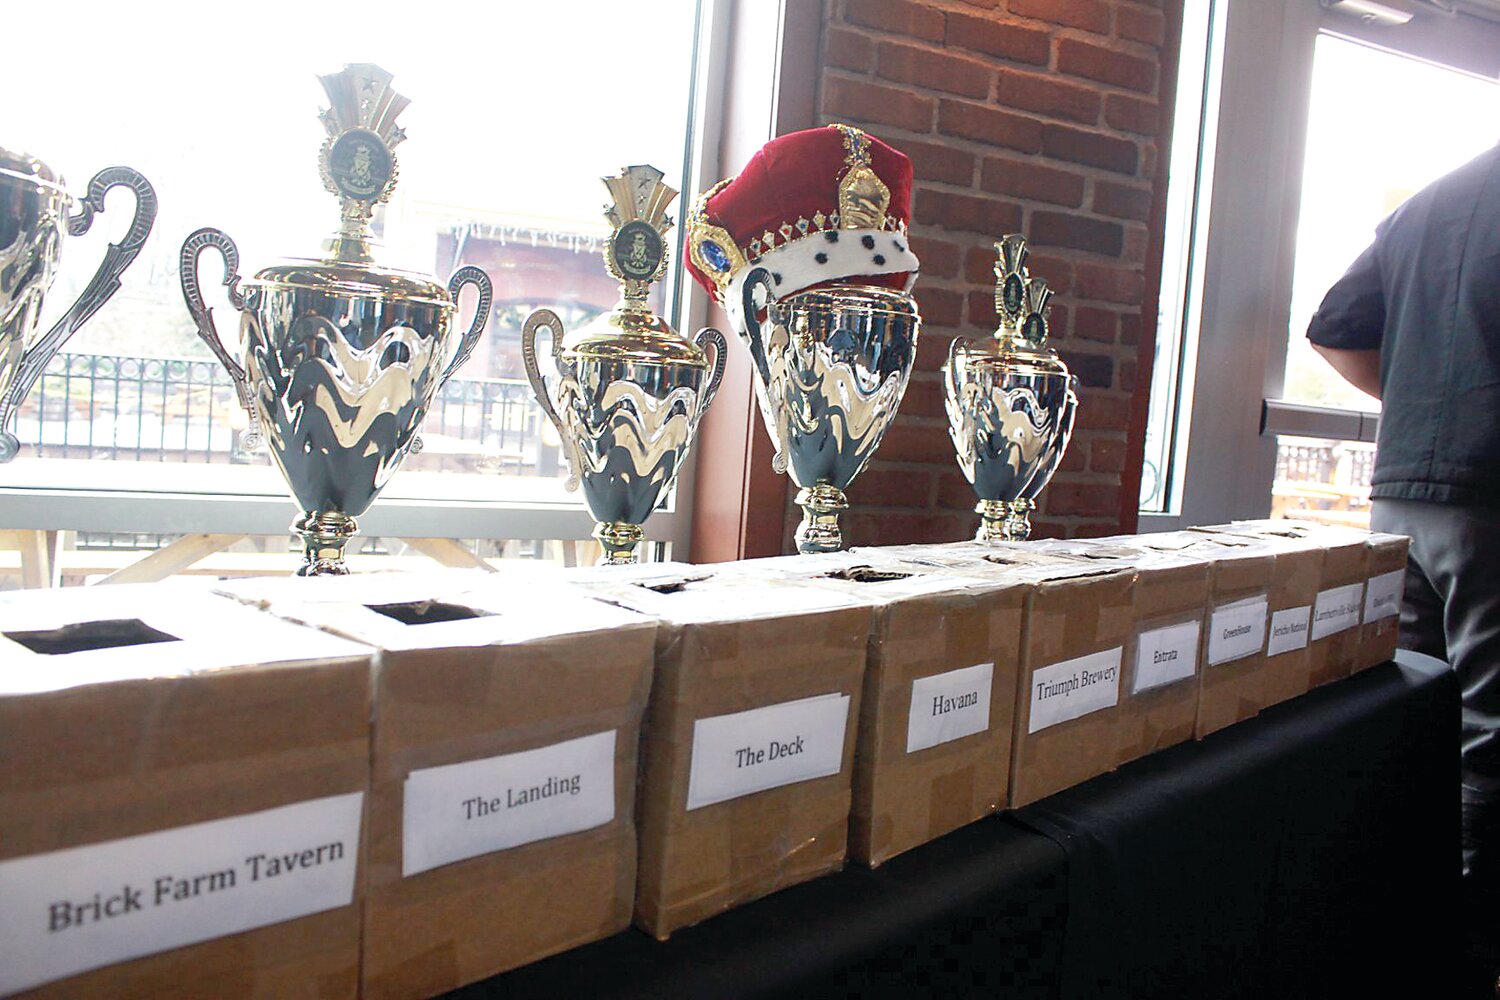 Chili Cook-off trophies and ballot boxes line the wall during last year’s event.